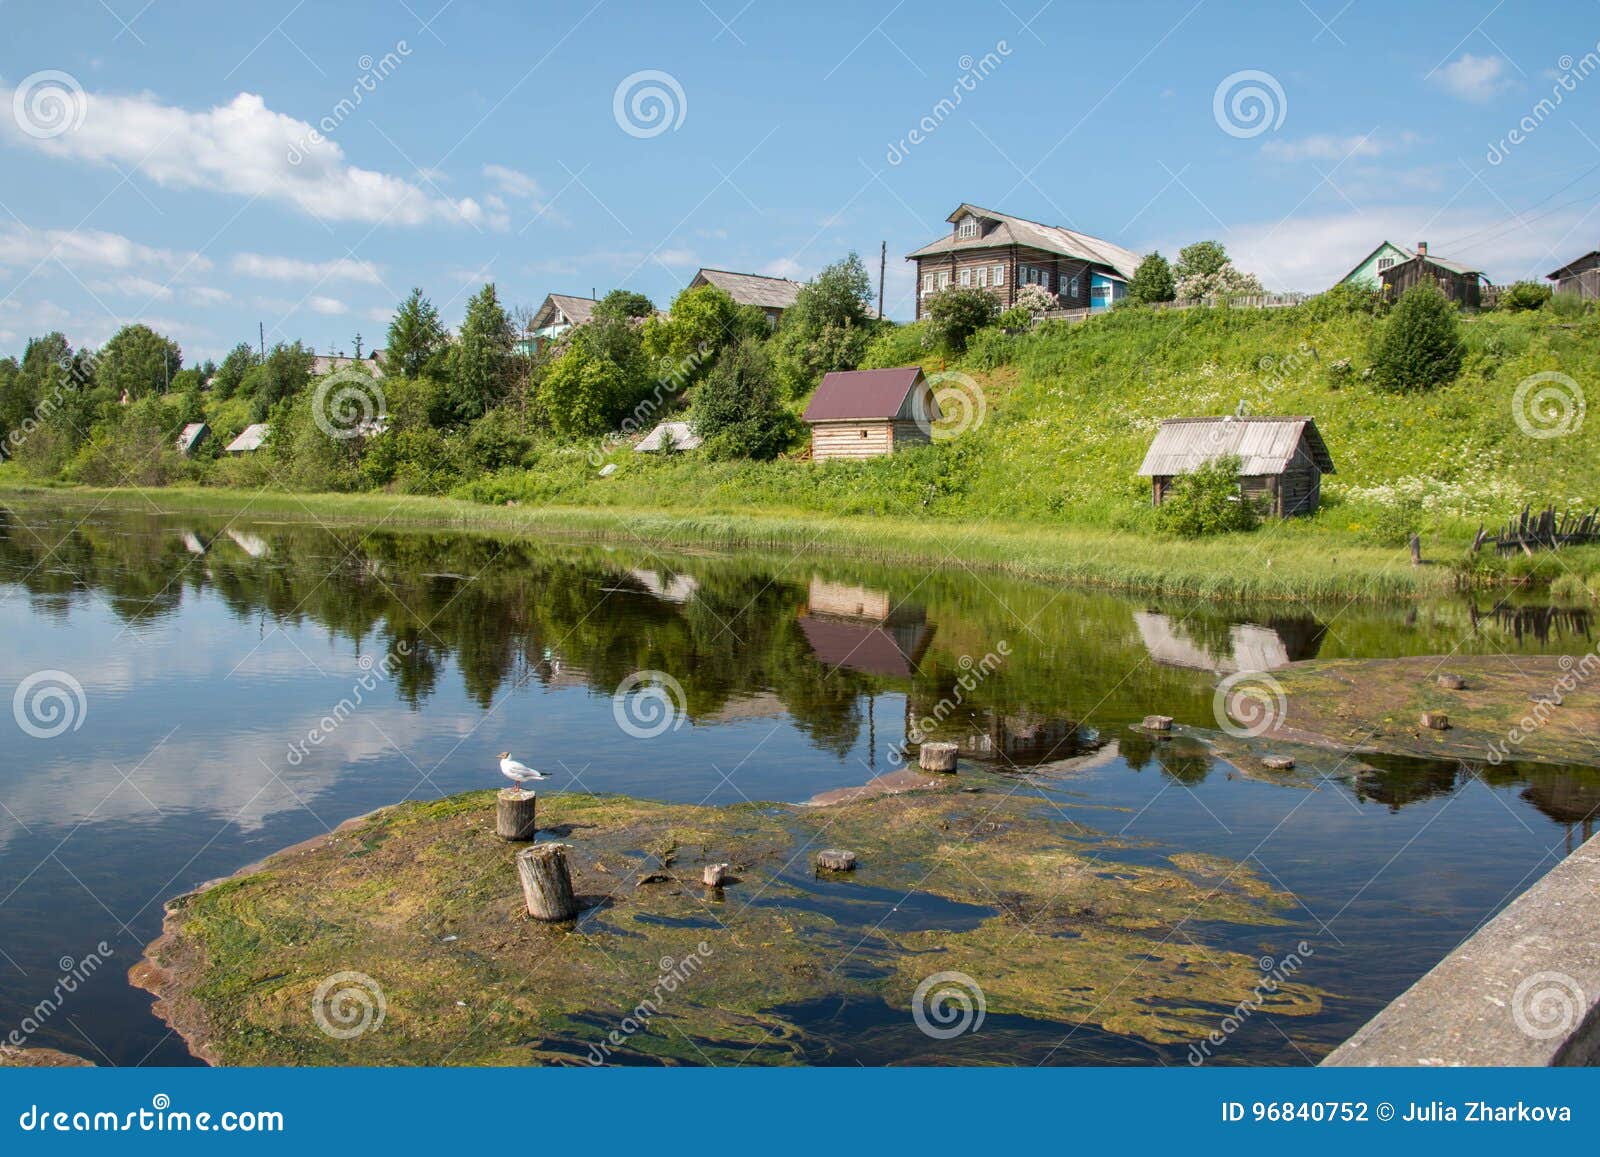 north russian village isady. summer day, emca river, old cottages on the shore, old wooden bridge and clouds reflections.